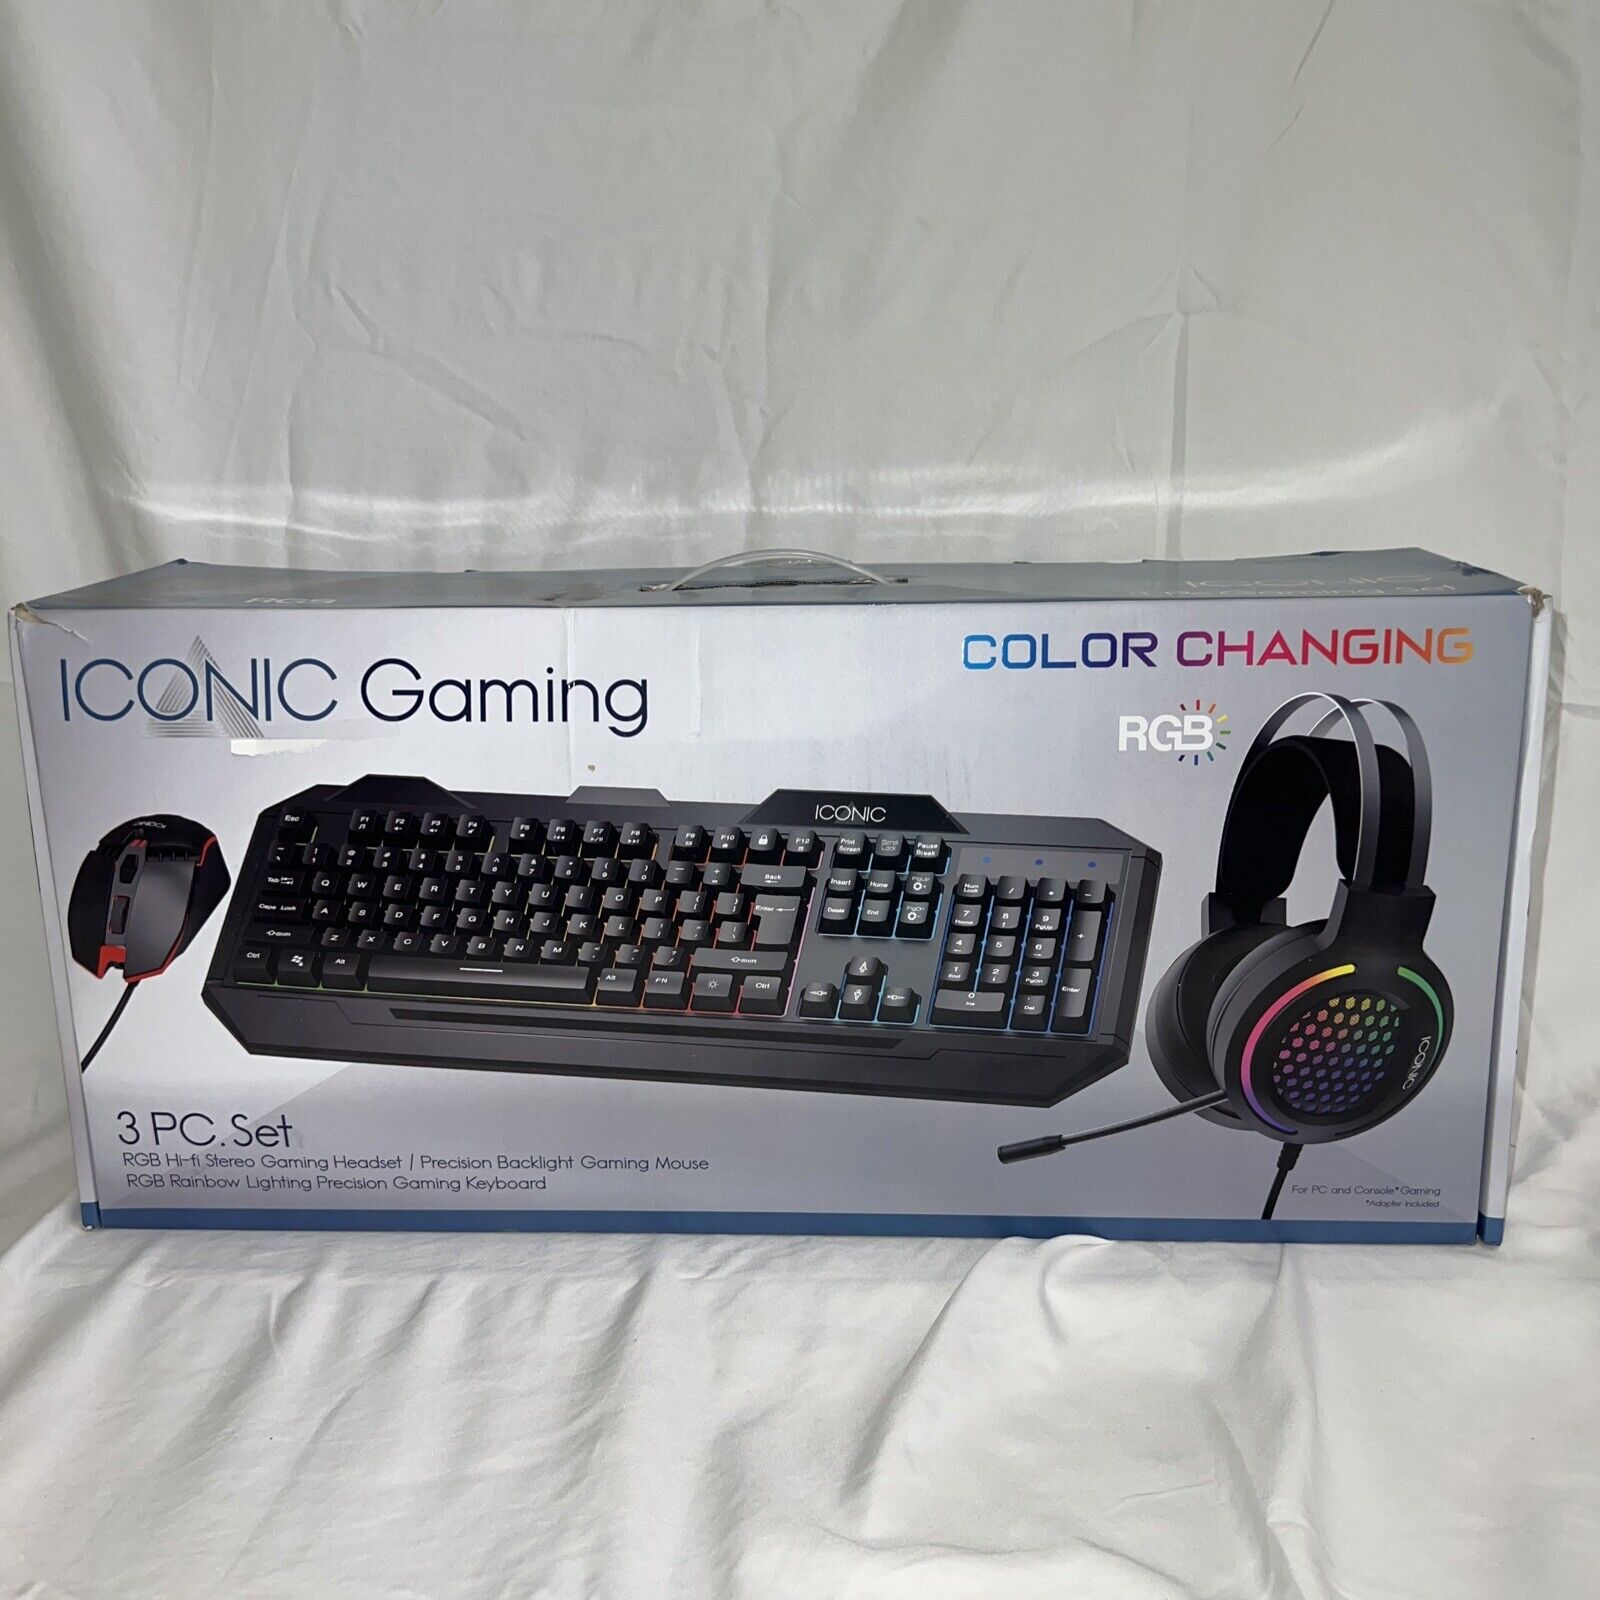 iconic Color Changing RGB Pro 3 Pc Gaming Set